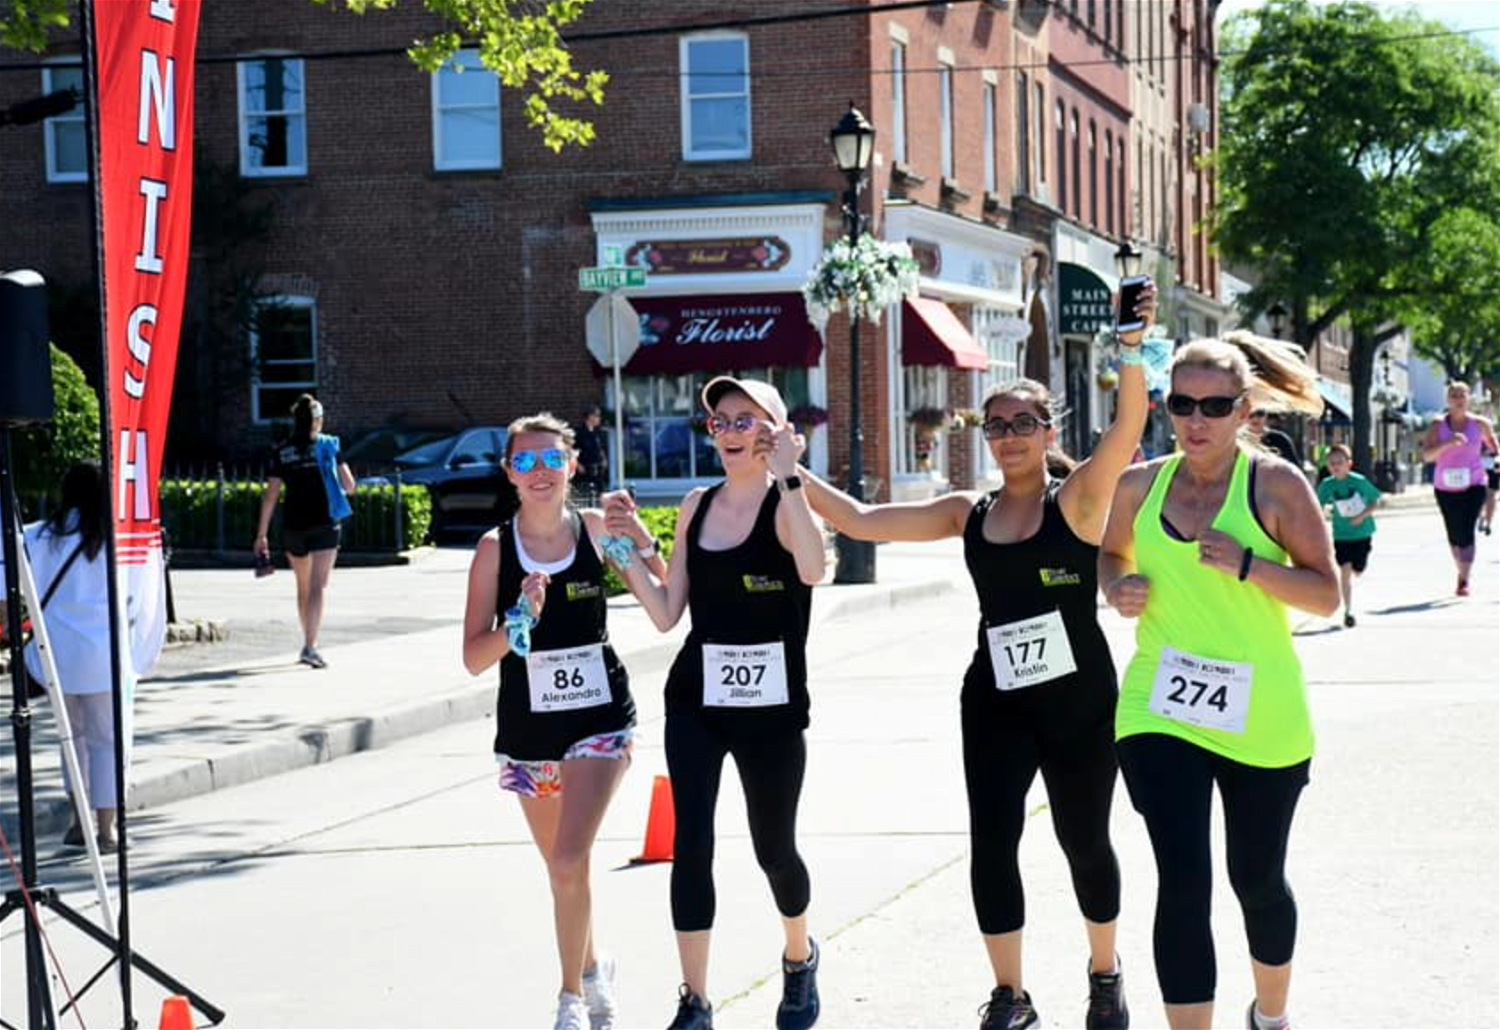 Runners at a past Downhill/Nautical Mile approach the waterfront finish. Photo via Facebook.